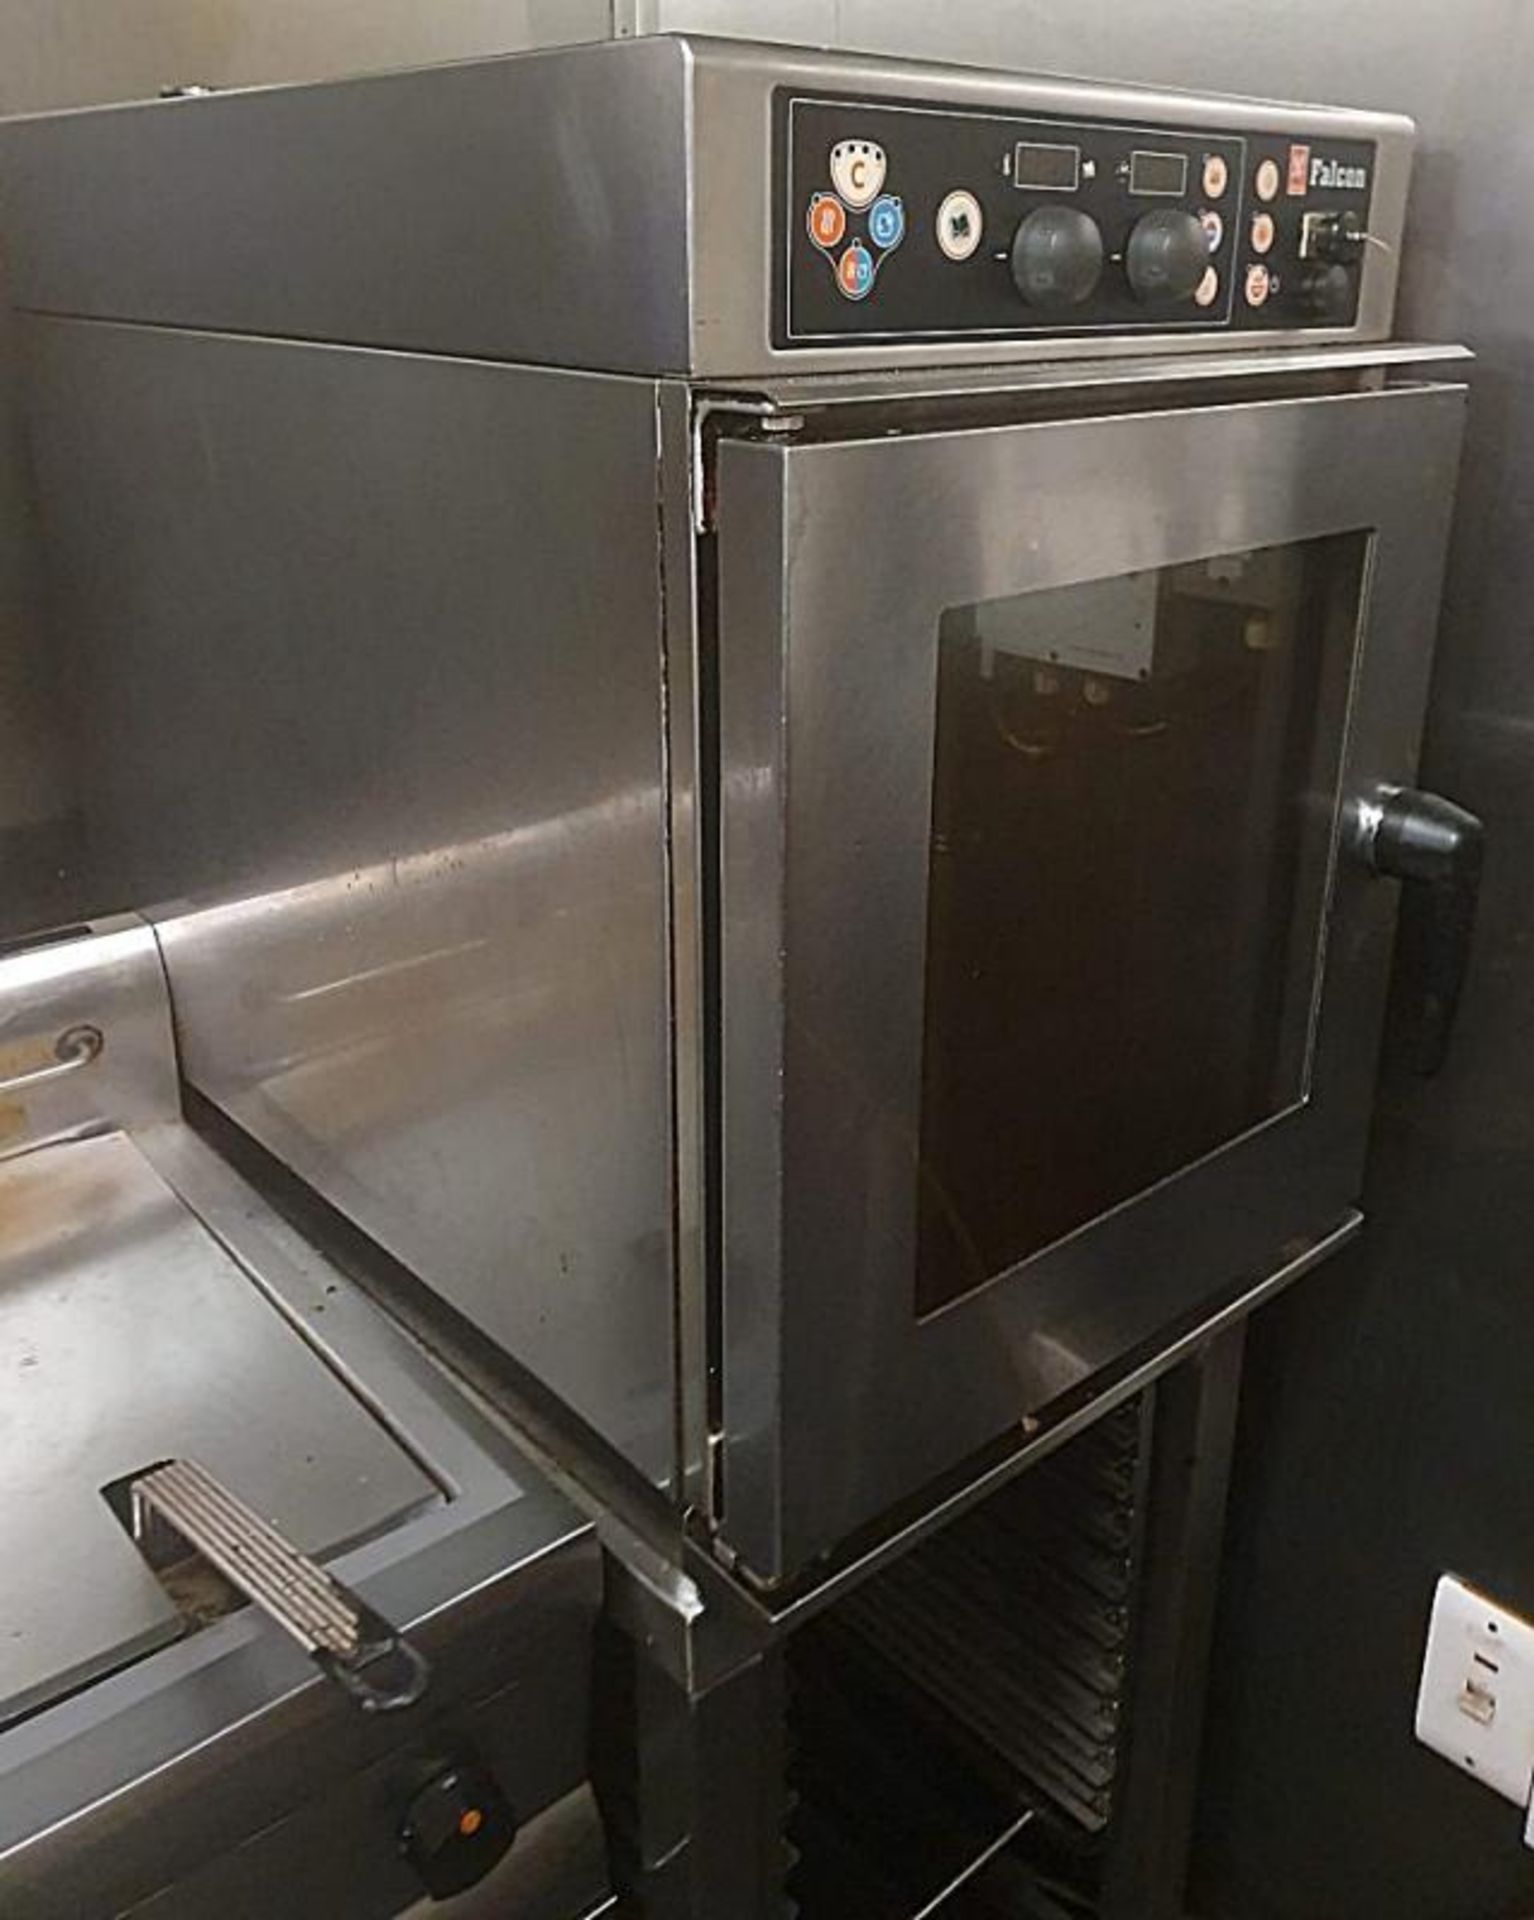 1 x FALCON Commercial 6-Grid Electric Combi Oven In Stainless Steel - Dimensions: 51 x 80 x H73cm + - Image 4 of 5